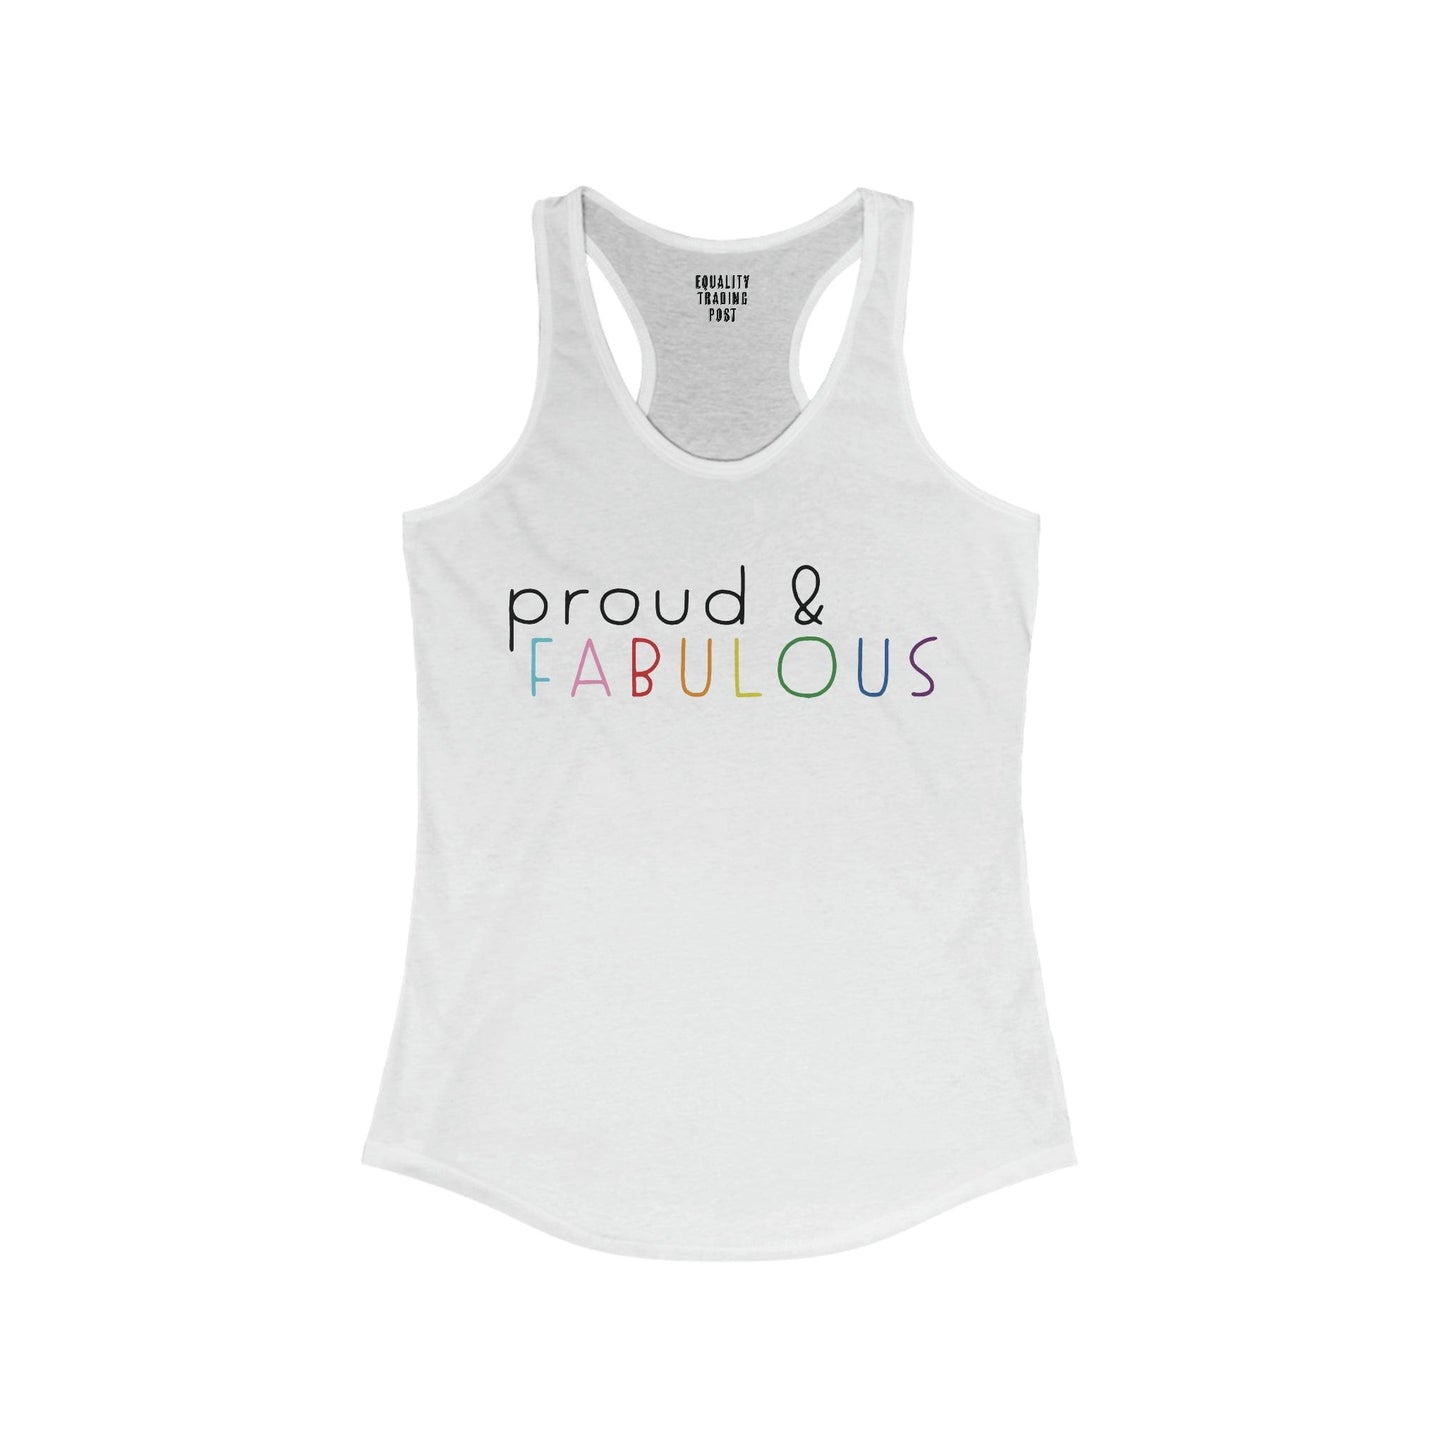 Proud & Fabulous Tank Top - Equality Trading Post 